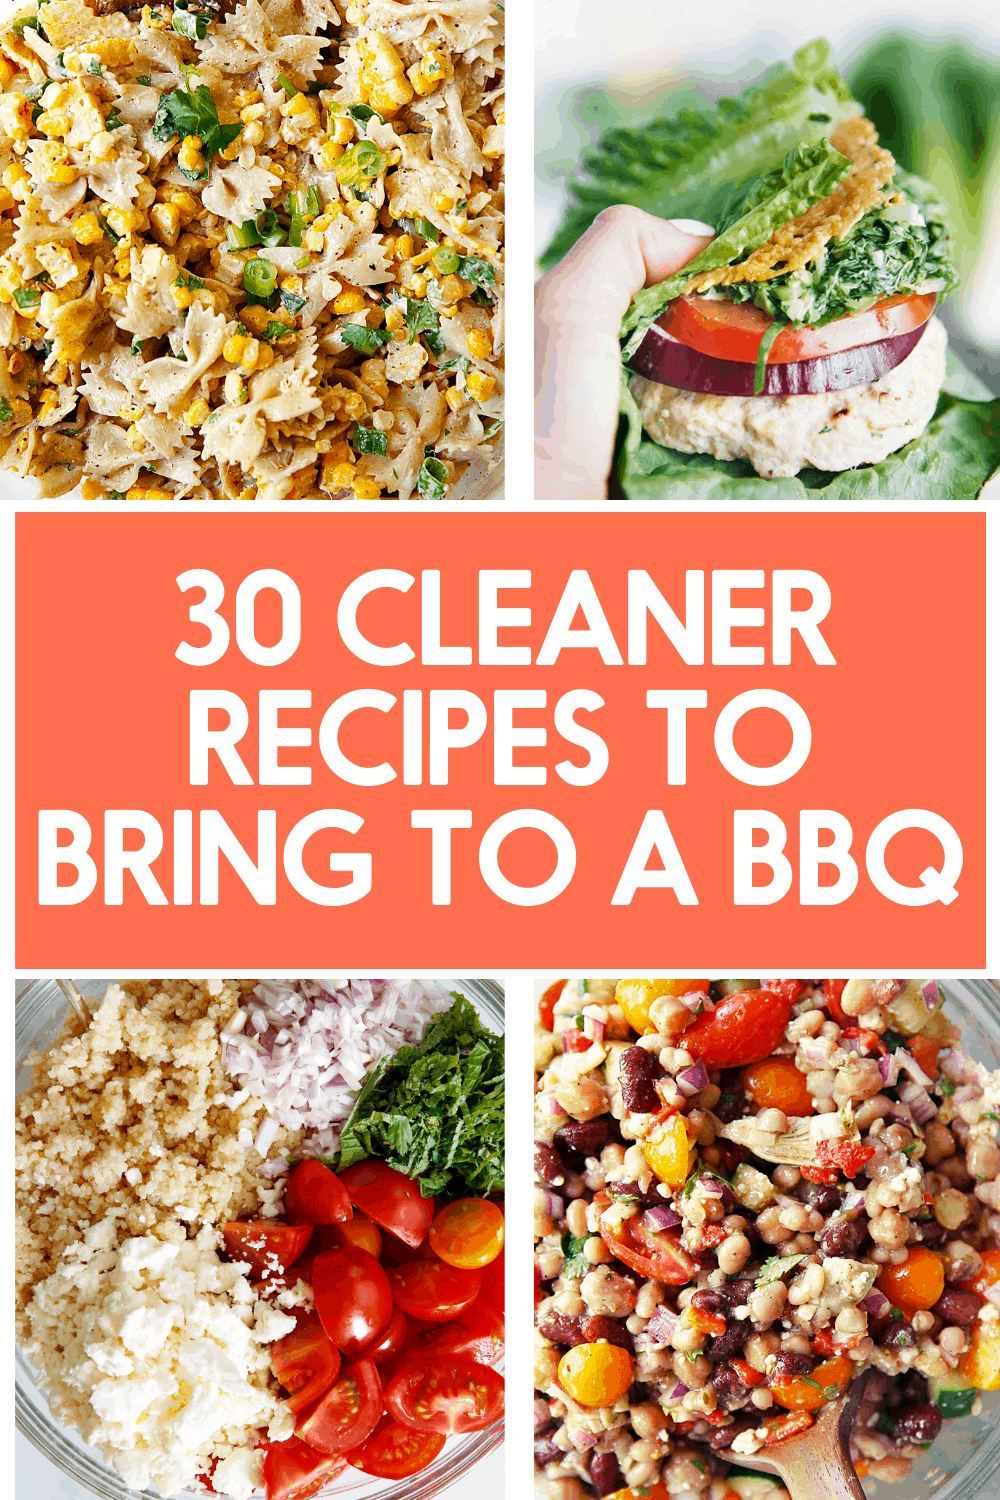 30+ Healthy Grill Recipes To Bring to Your BBQ